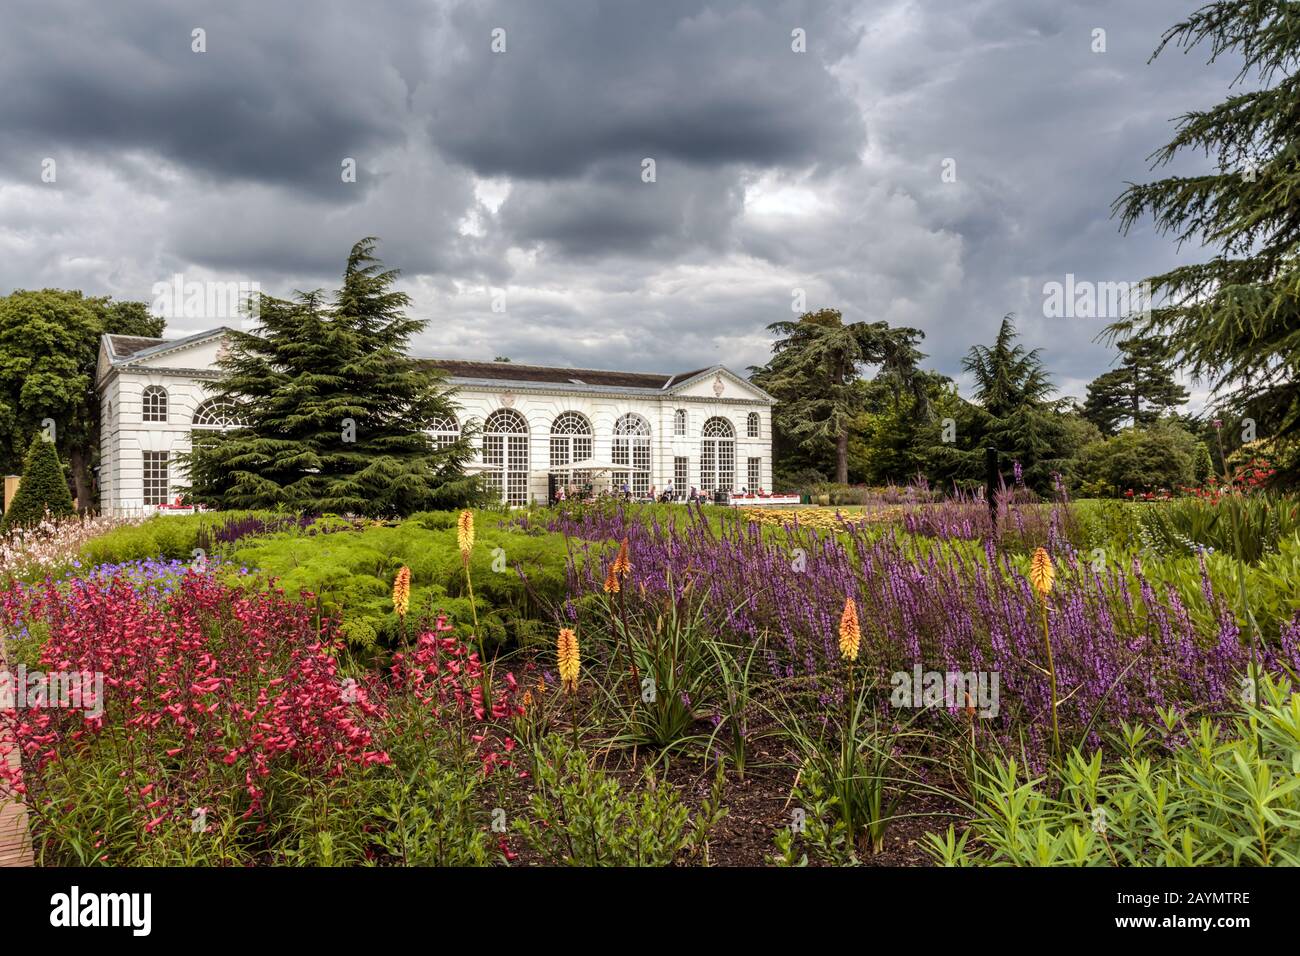 Flower beds in front of the Orangery, designed by Sir William Chambers, and completed in 1761. The Royal Botanic Gardens, Kew, Surrey, England. Stock Photo